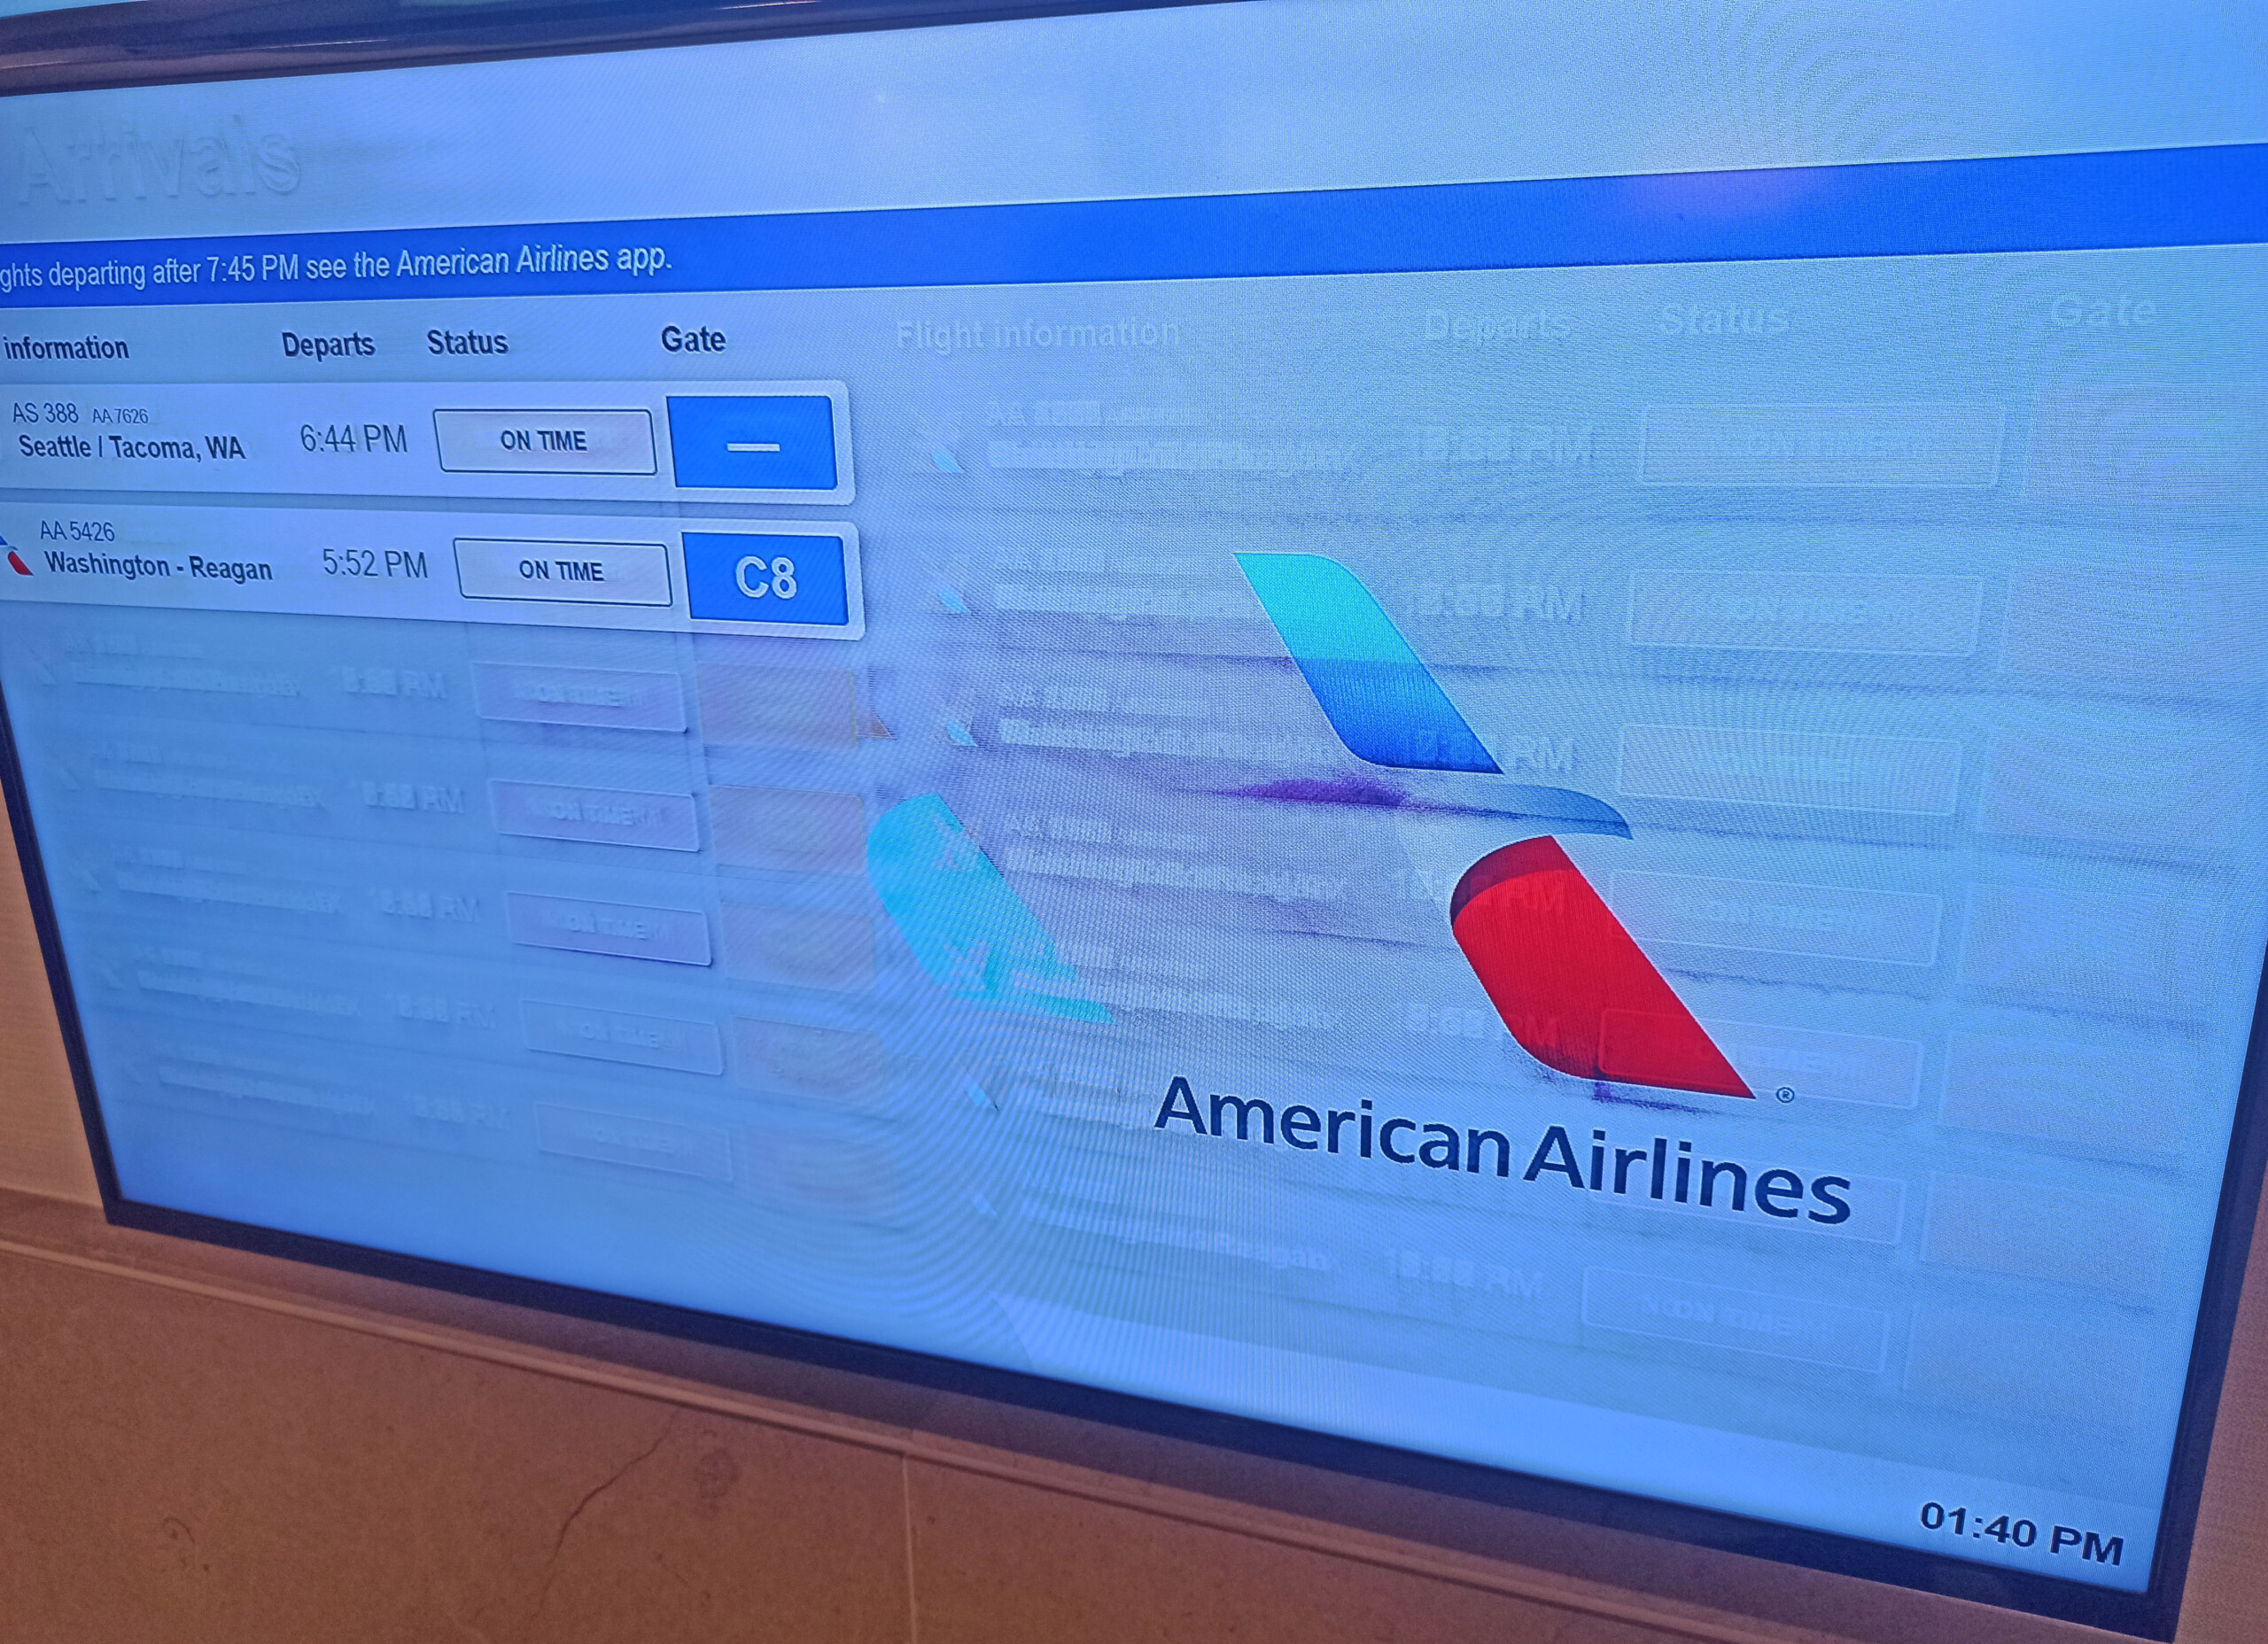 Burned-in FIDS (Flight Information Display Screen) at St. Louis Admirals Club